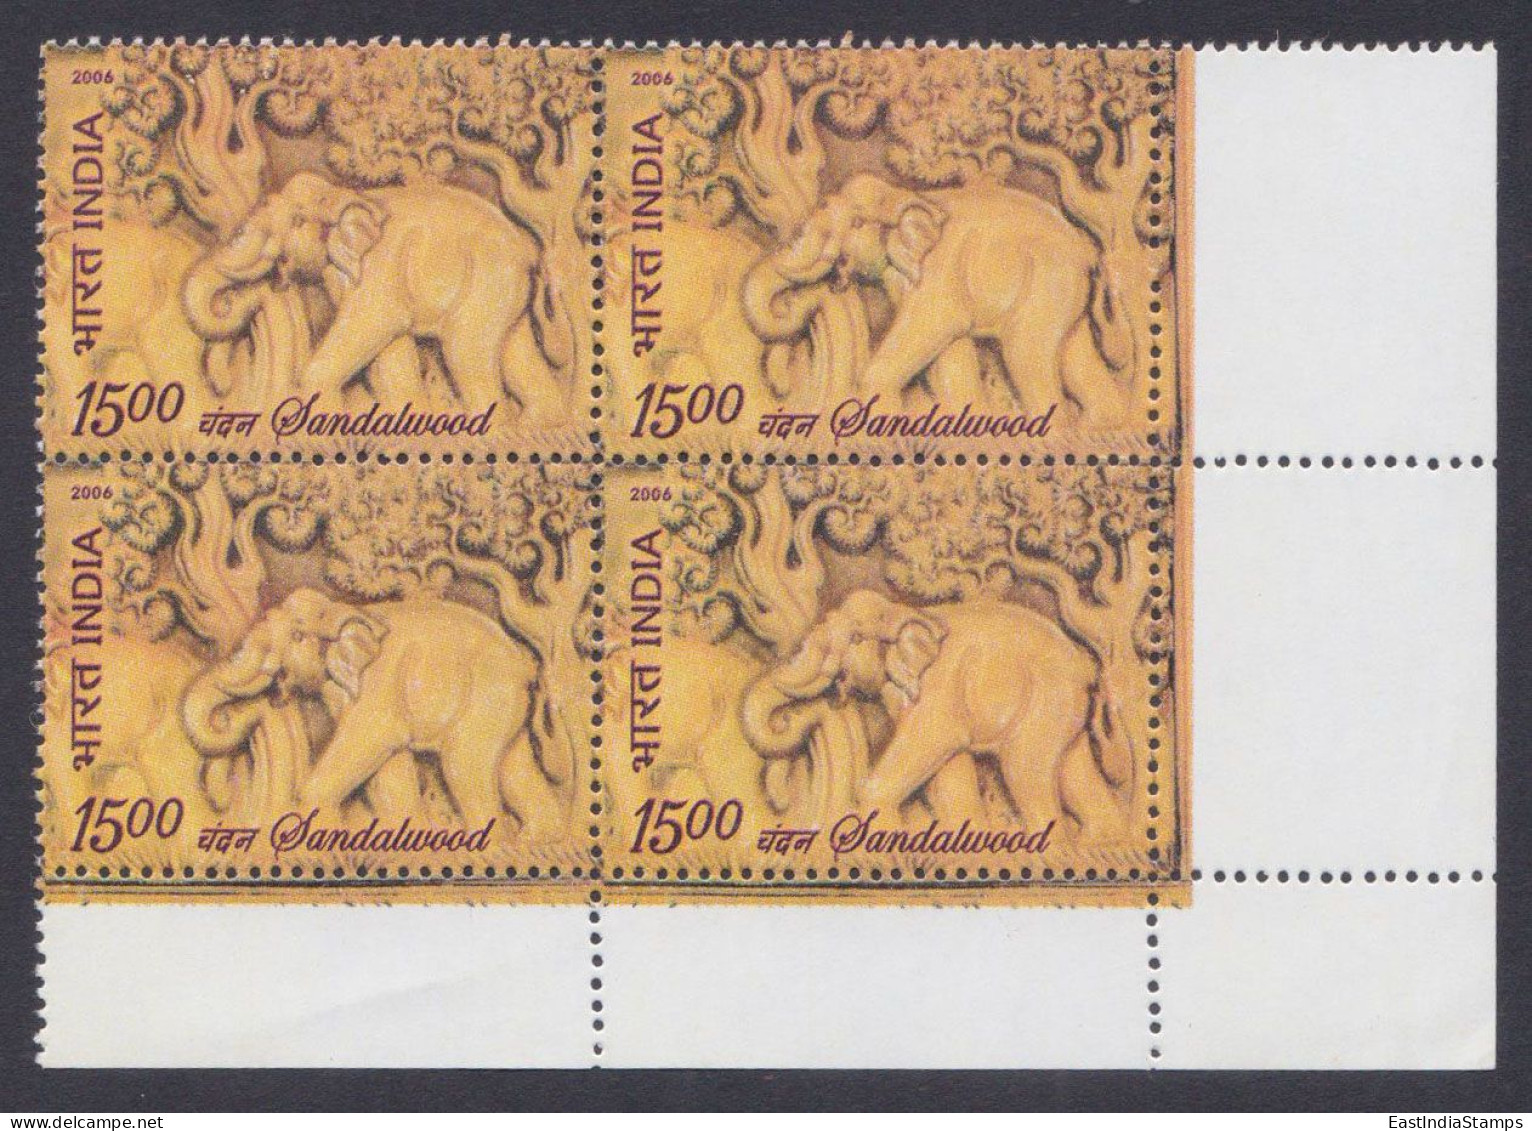 Inde India 2006 MNH Sandalwood, Scented Stamp, Elephant, Scupture, Scented Wood, Scent, Perfume, Block - Neufs